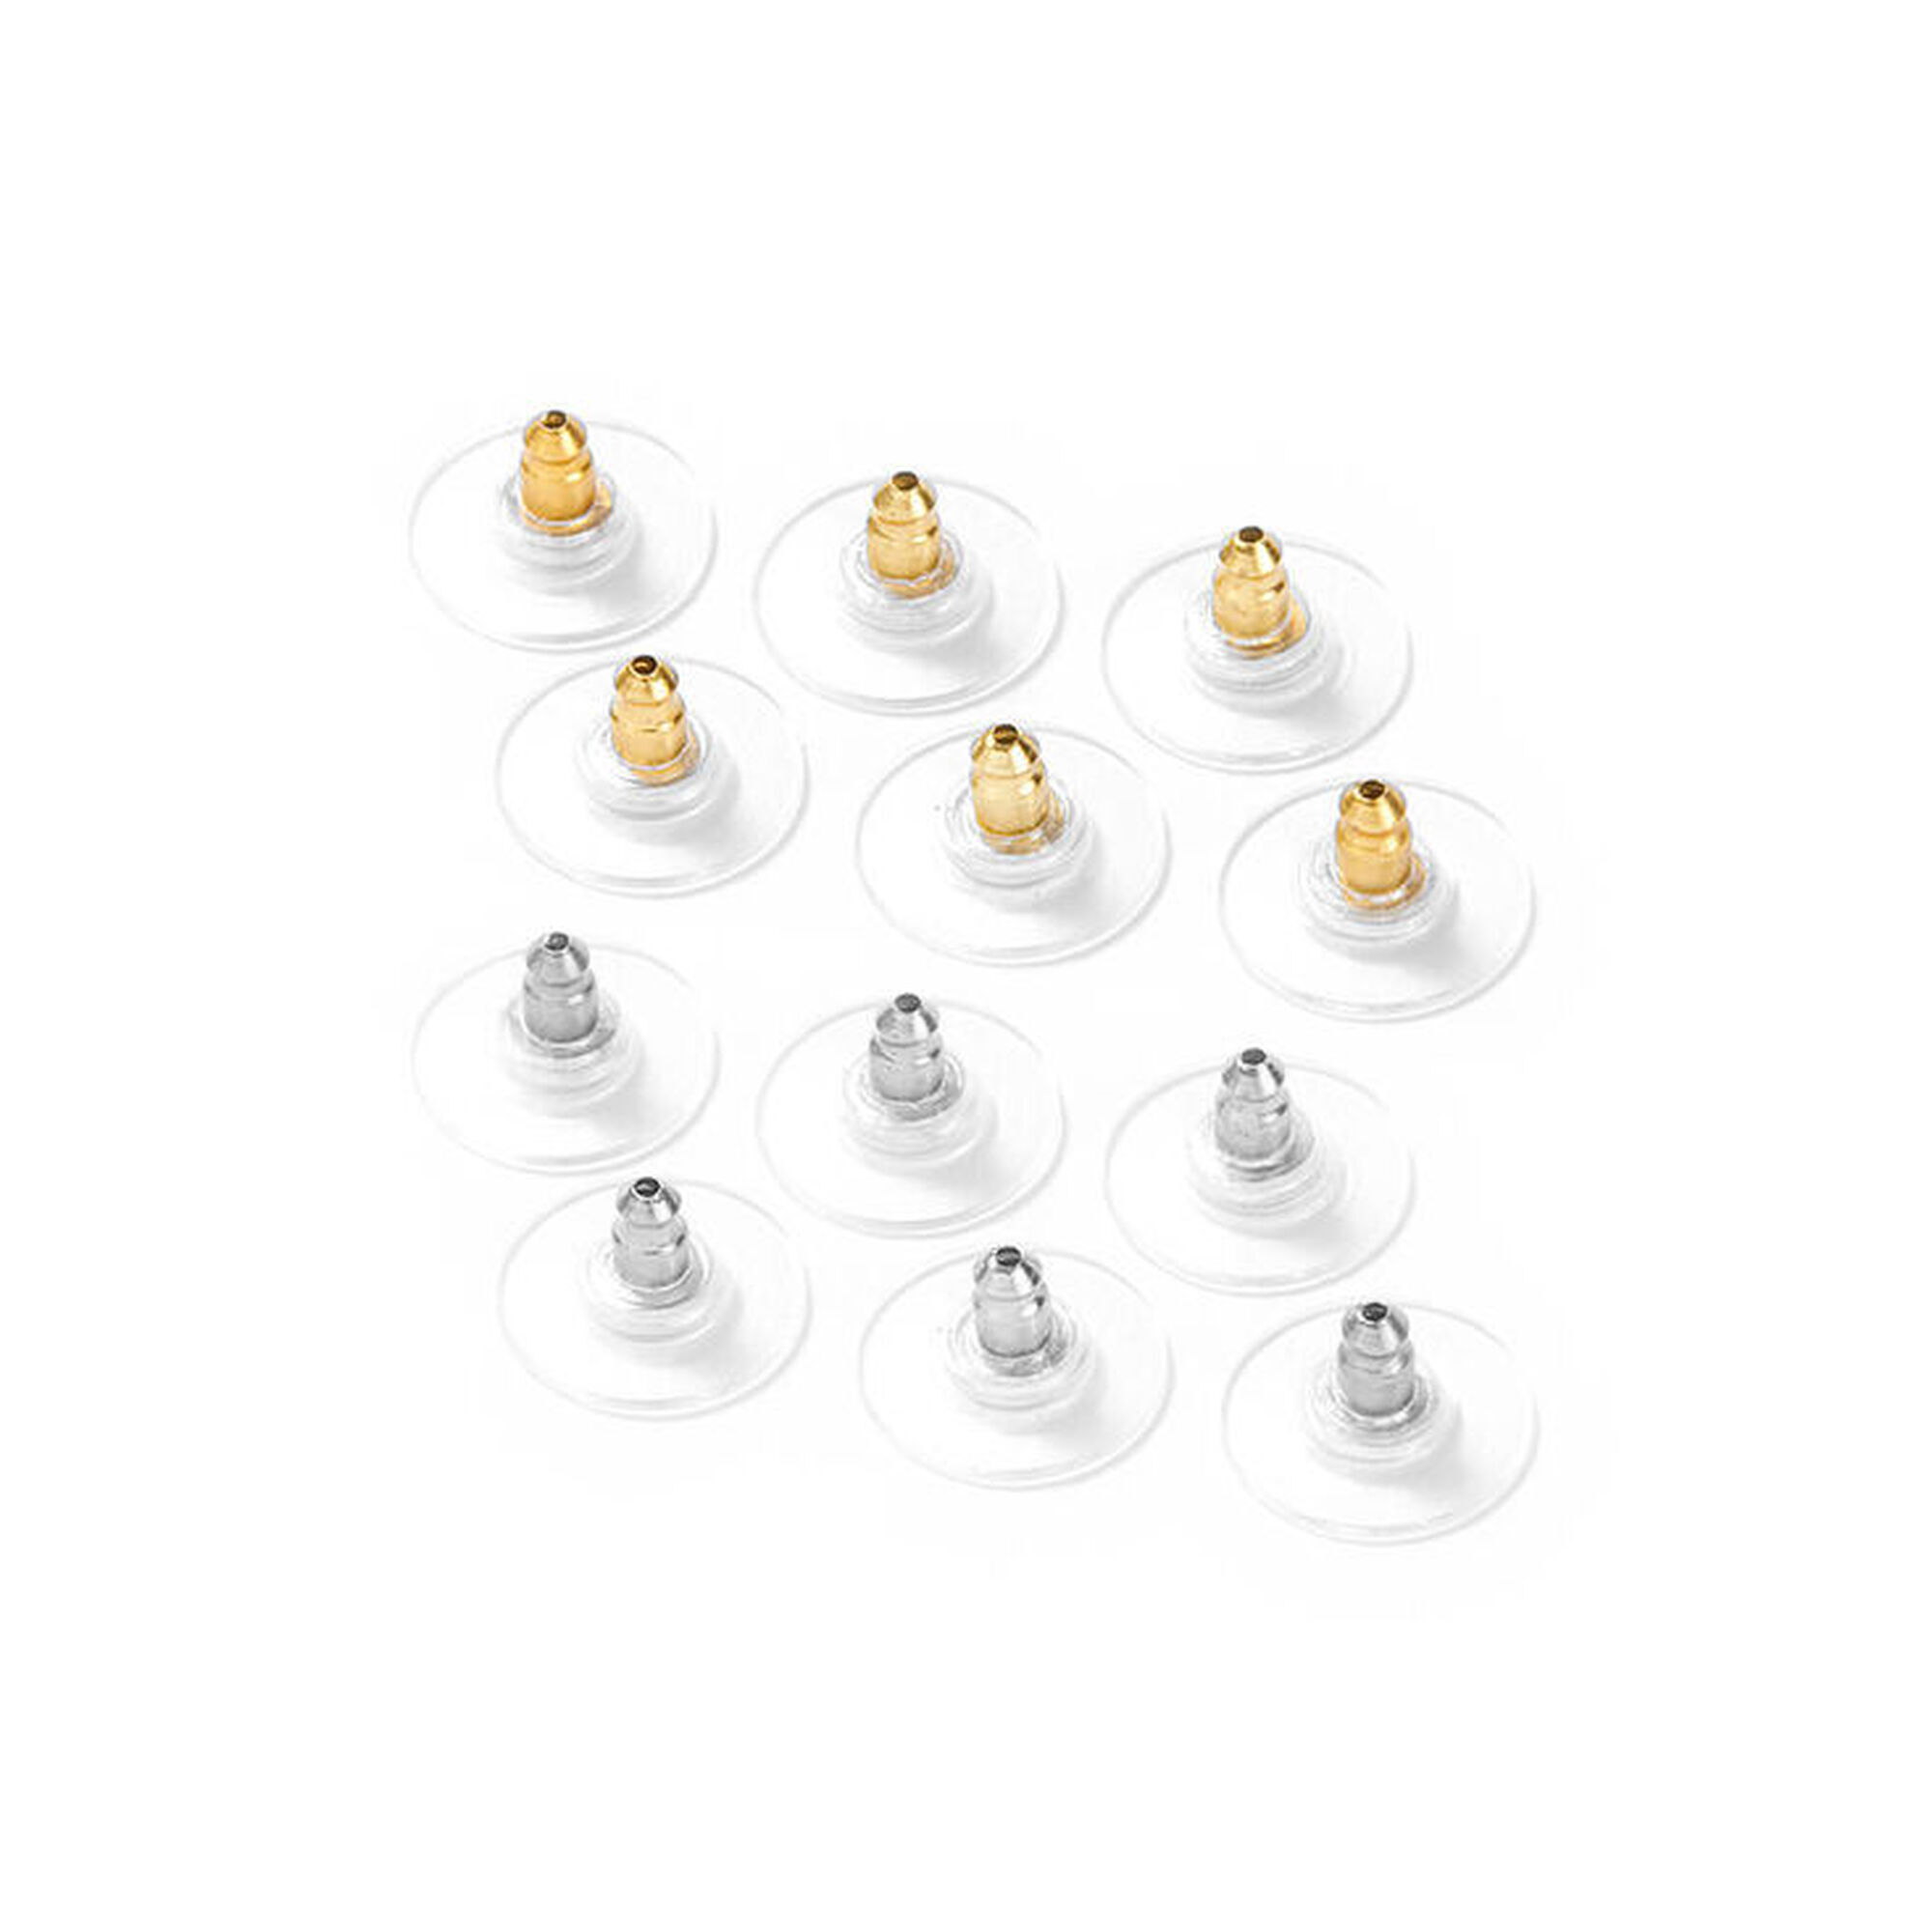 View Claires Supportive Earring Backs 12 Pack information